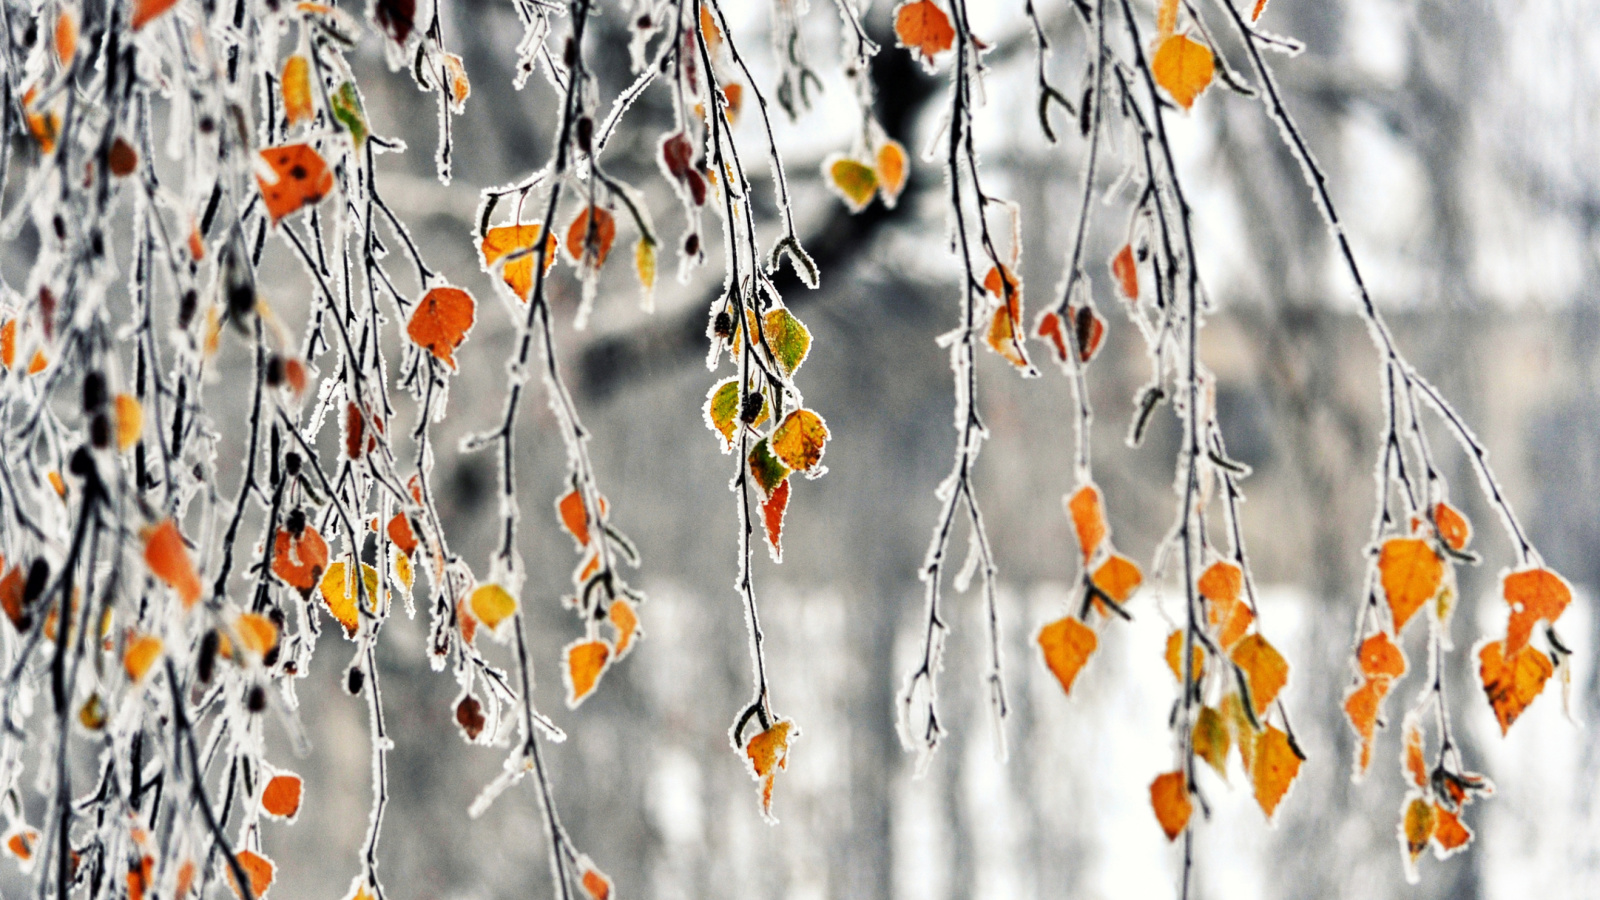 Autumn leaves in frost screenshot #1 1600x900